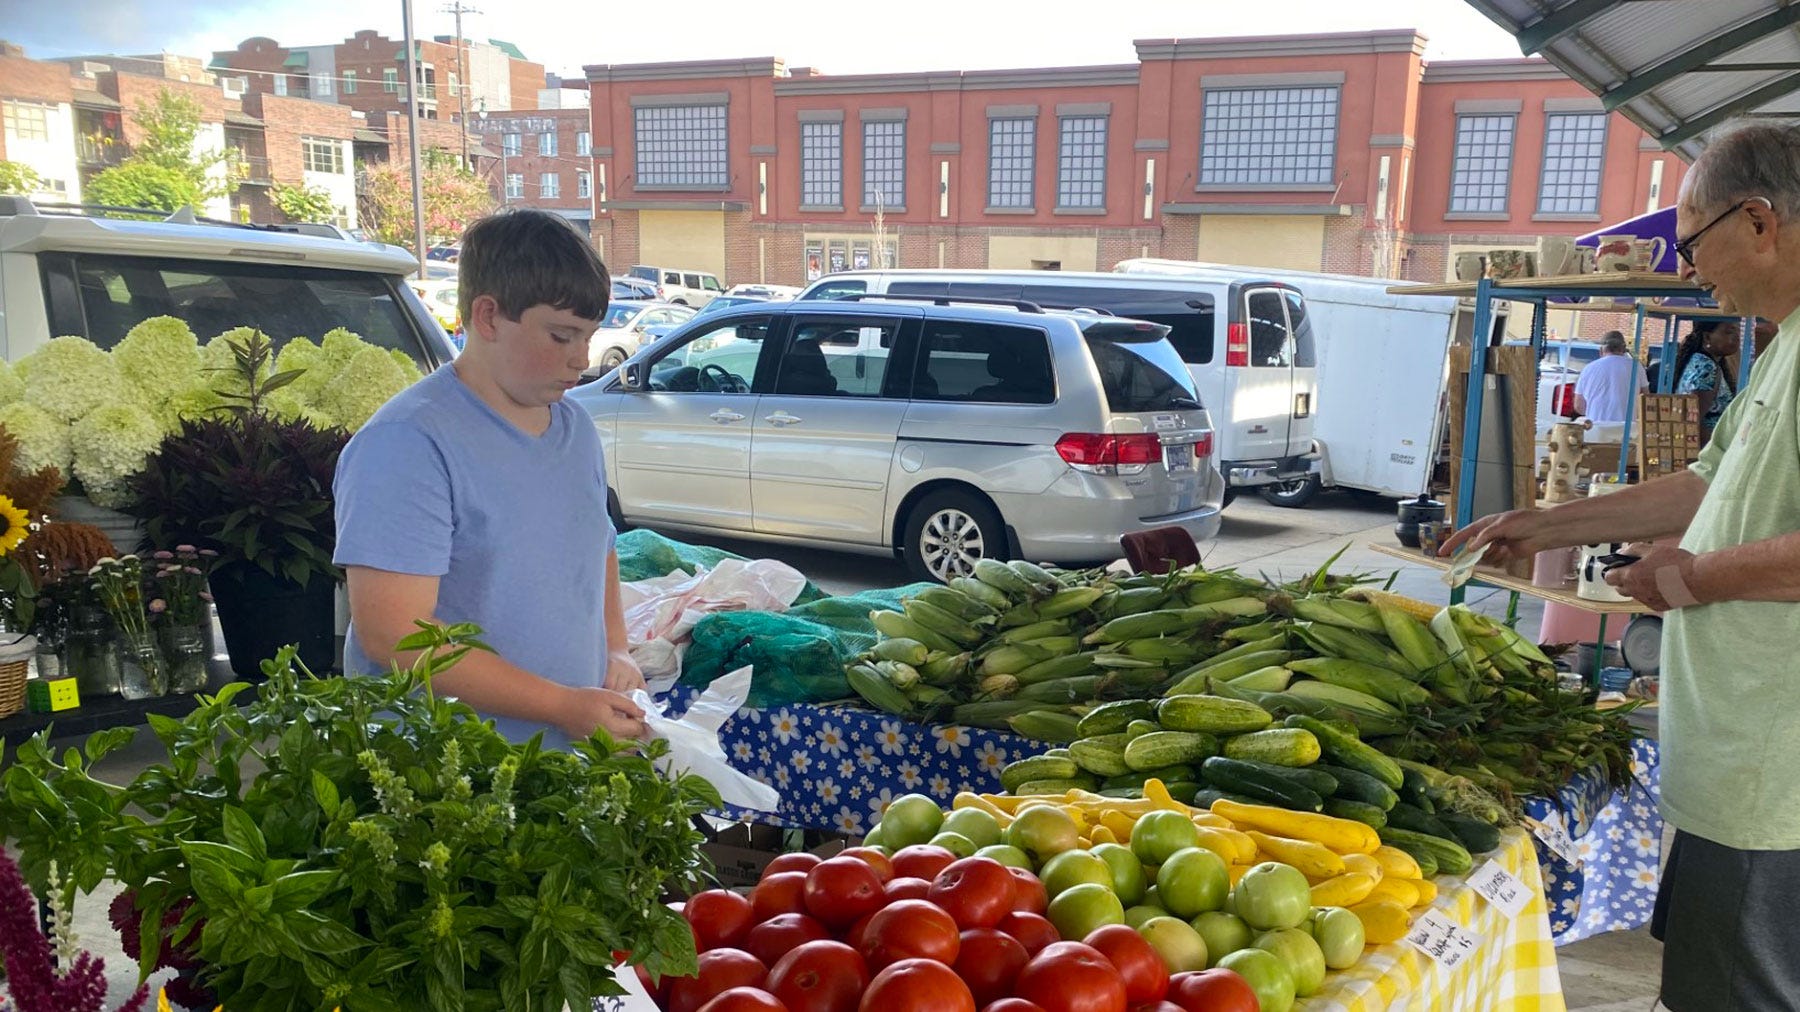 Boy working farmers market stand, bagging vegetables for a customer.